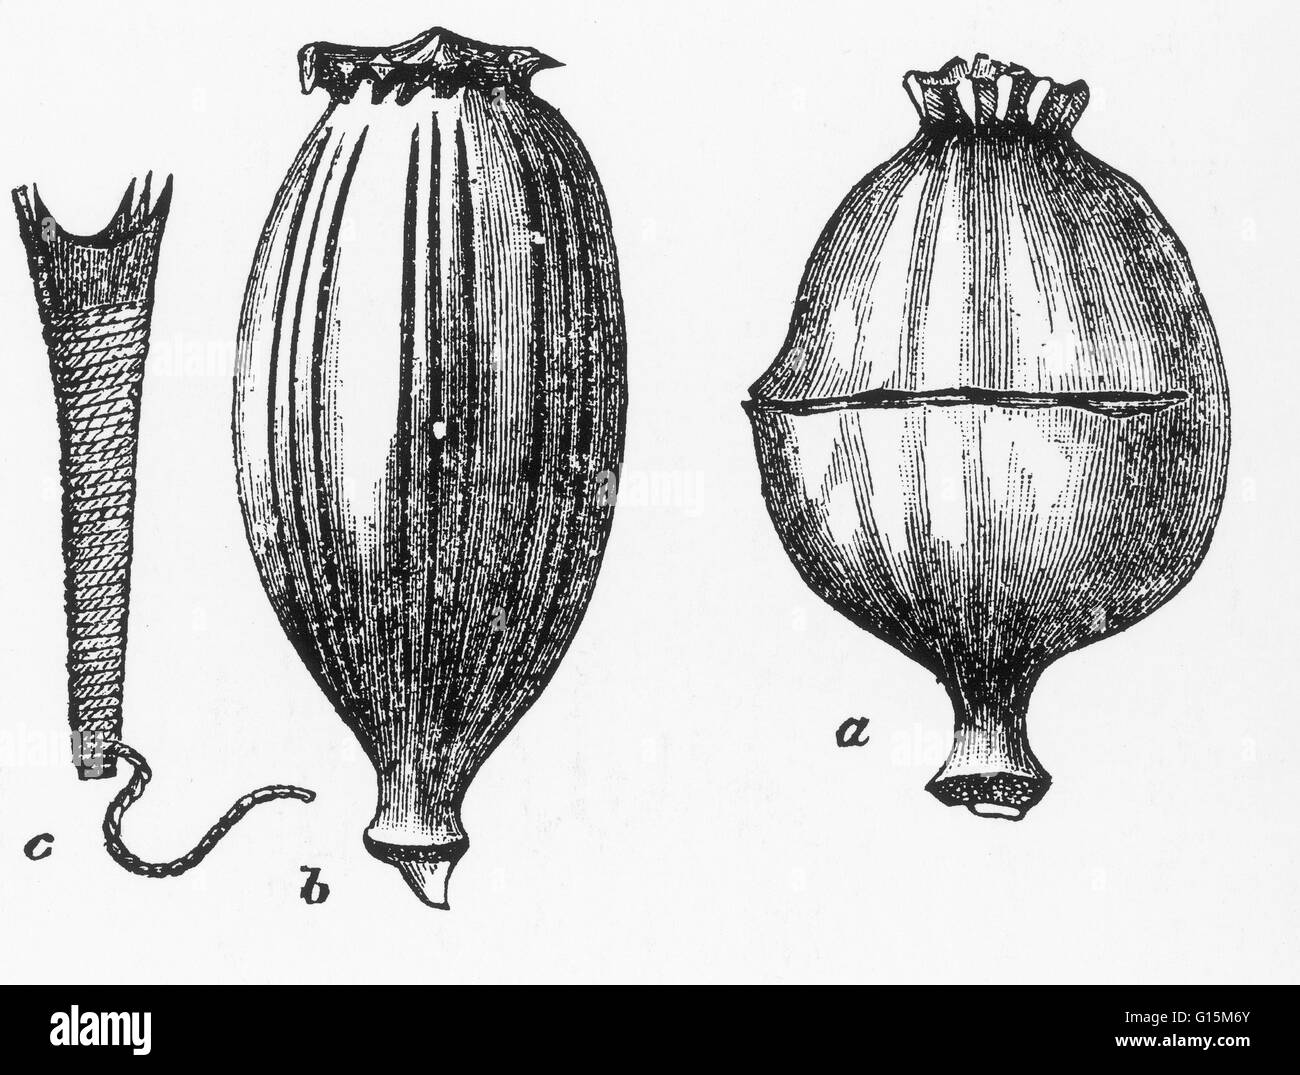 A nushtur or incisor (left), which is an instrument used in India for making incisions in poppy pods; a poppy pod showing the vertical cuts made by harvesters in India (middle); and another with a horizontal cut that would have been made in Turkey (right) Stock Photo